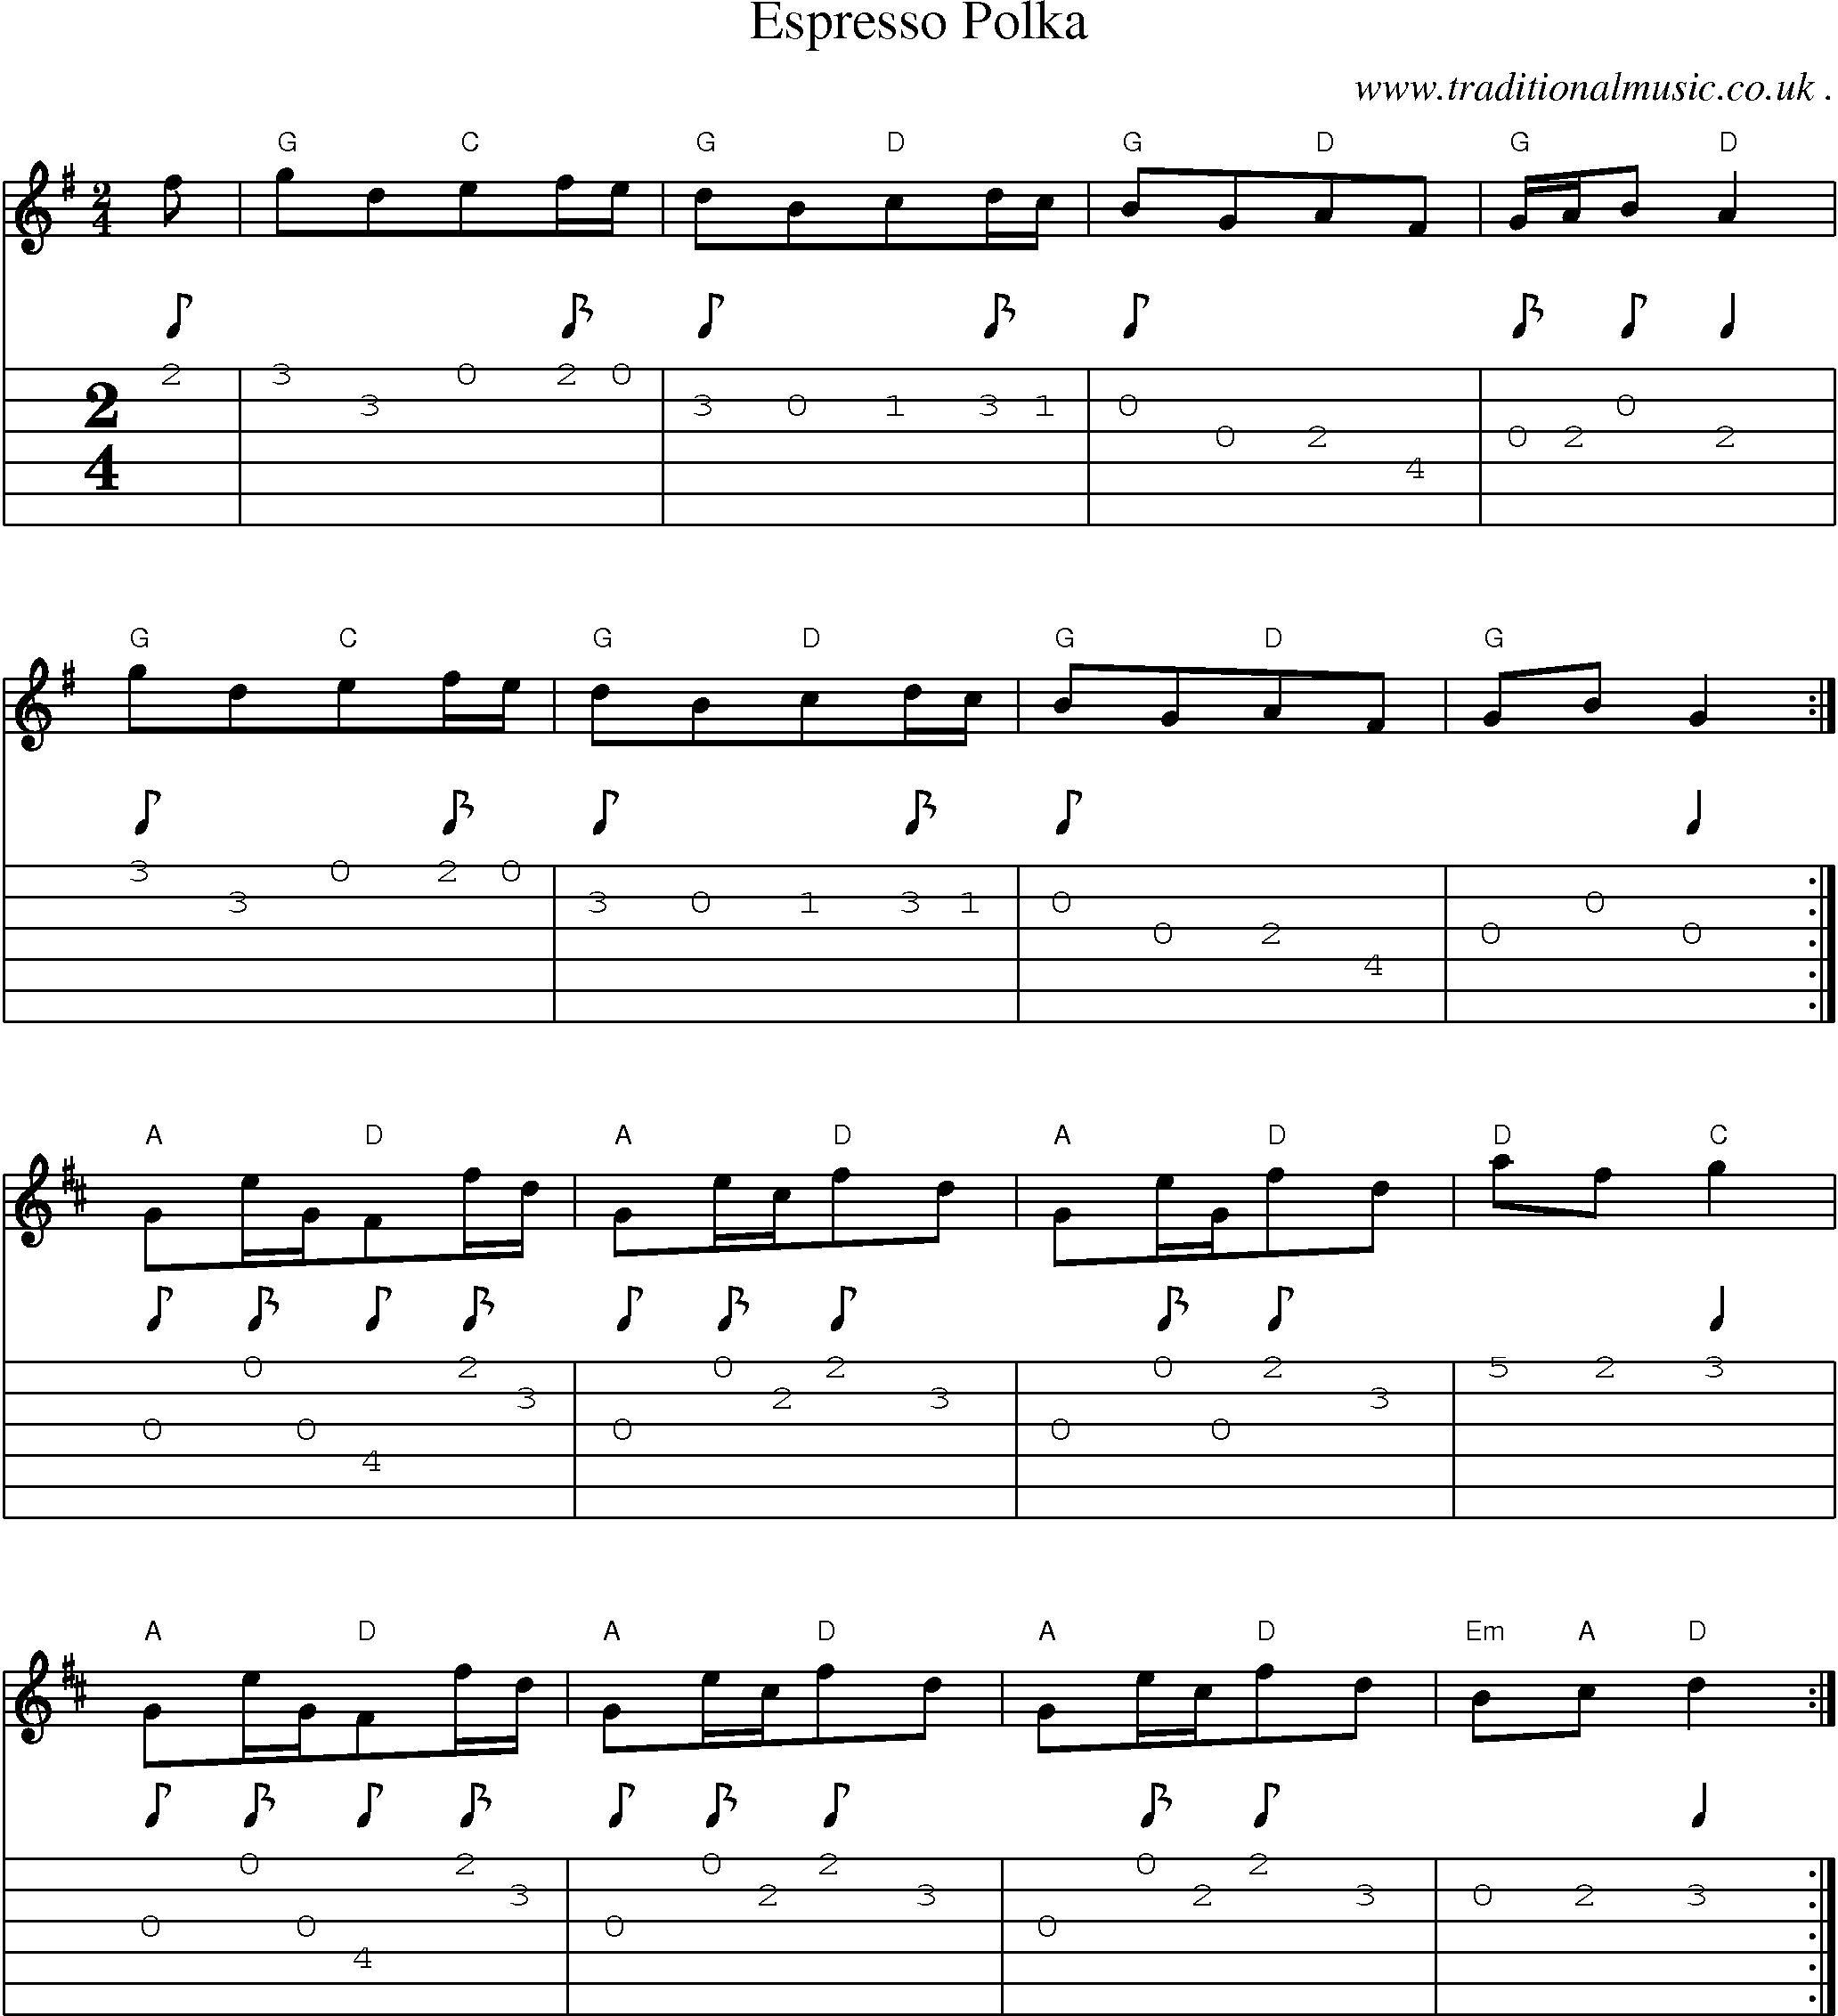 Sheet-Music and Guitar Tabs for Espresso Polka